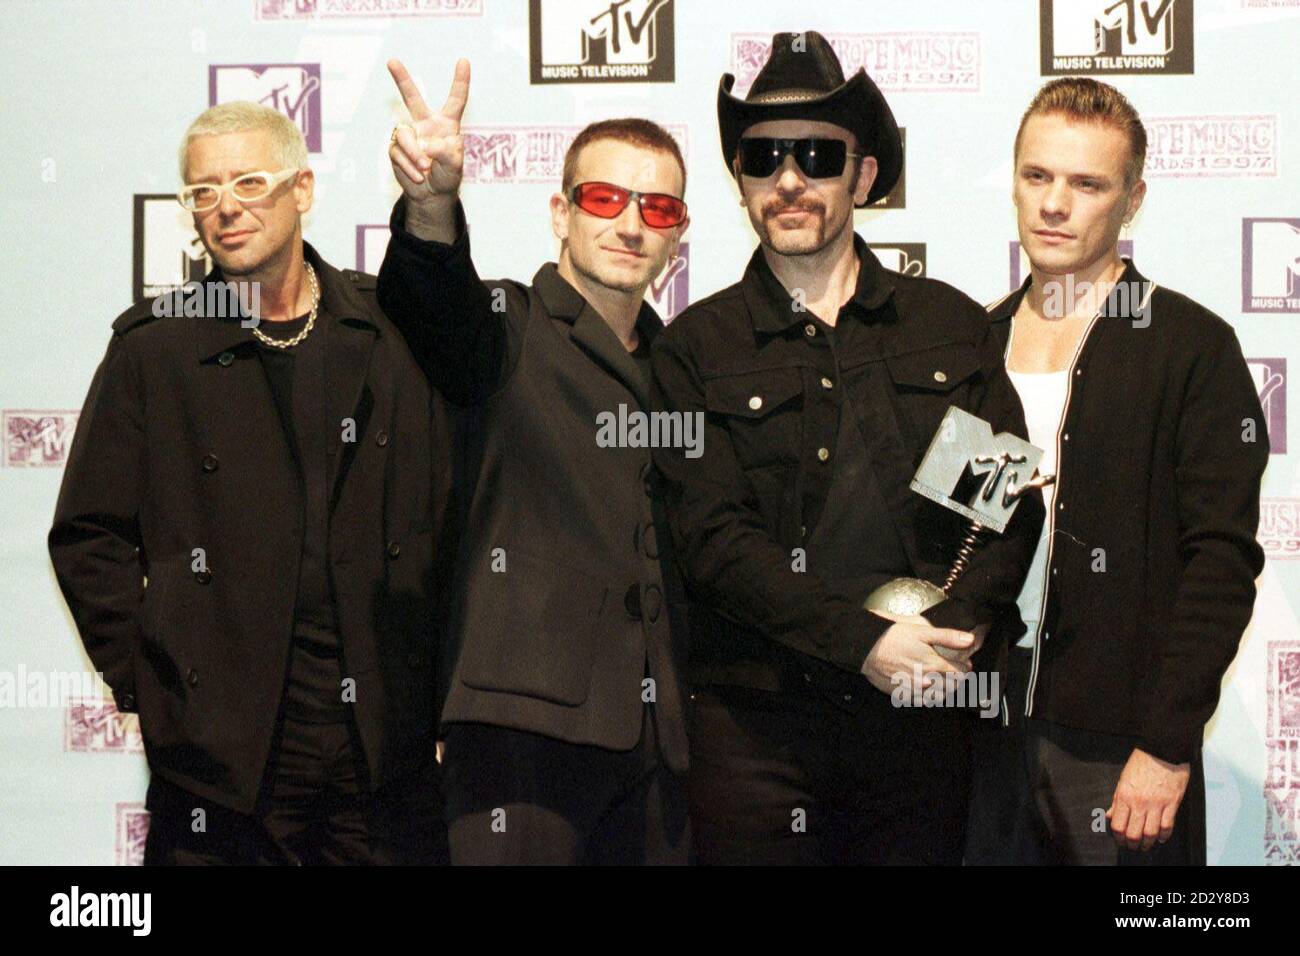 Ireland's U2  backstage at the MTV Europe Music Awards ceremony in Rotterdam after being presented with the award for Best Live Act. (L-R) Adam Clayton, Bono Vox, The Edge & Larry Mullen Jr. Stock Photo